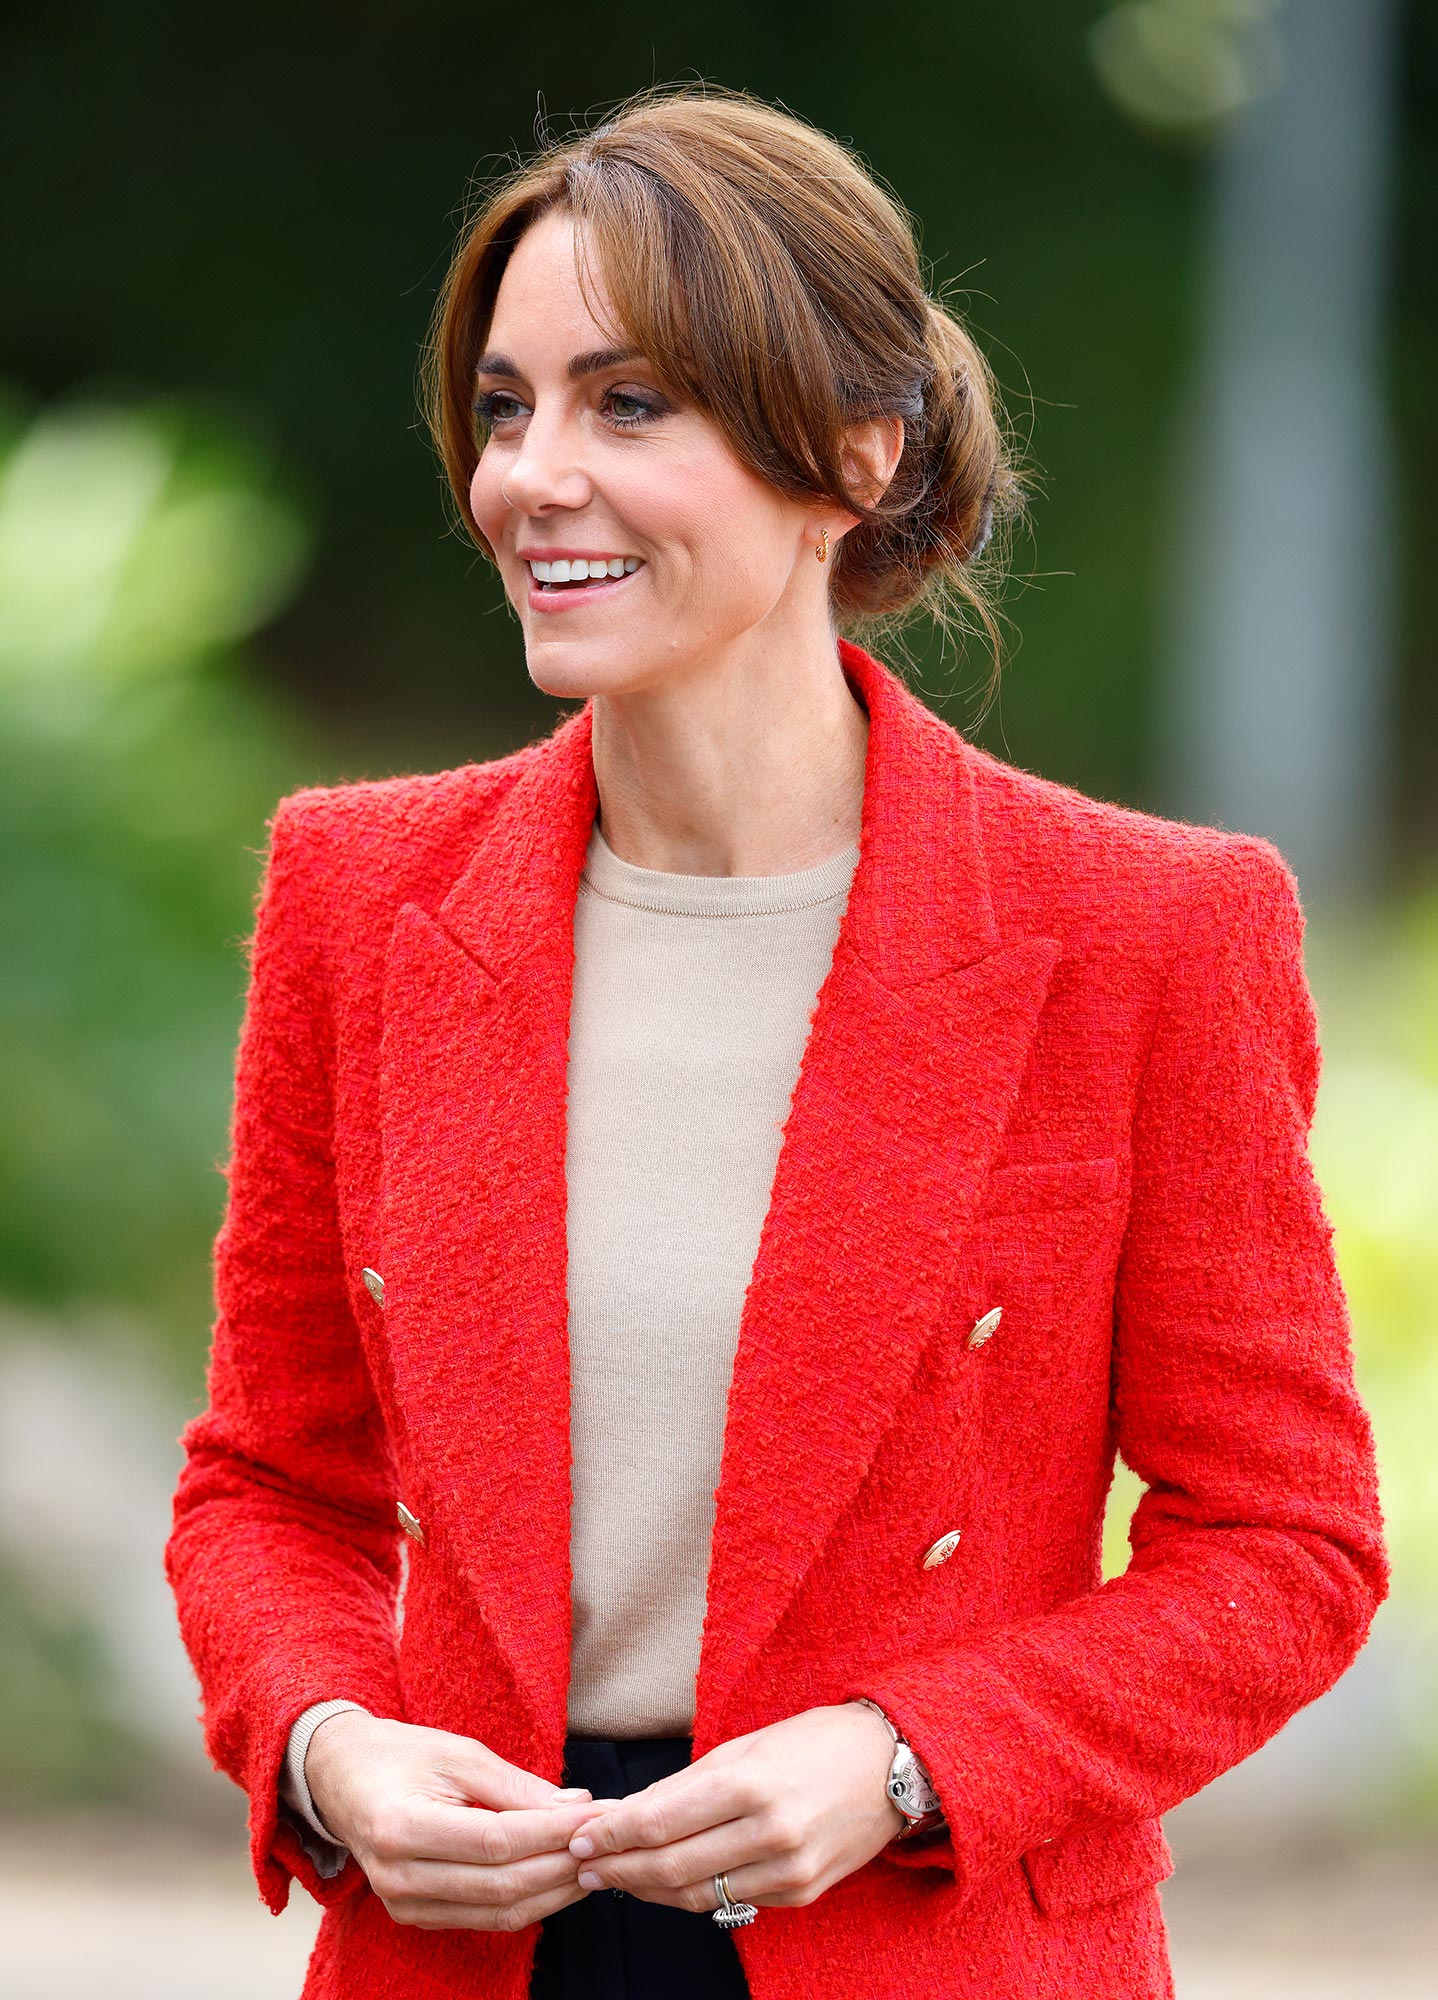 20 of Kate Middleton's Best Hair Moments Over The Years